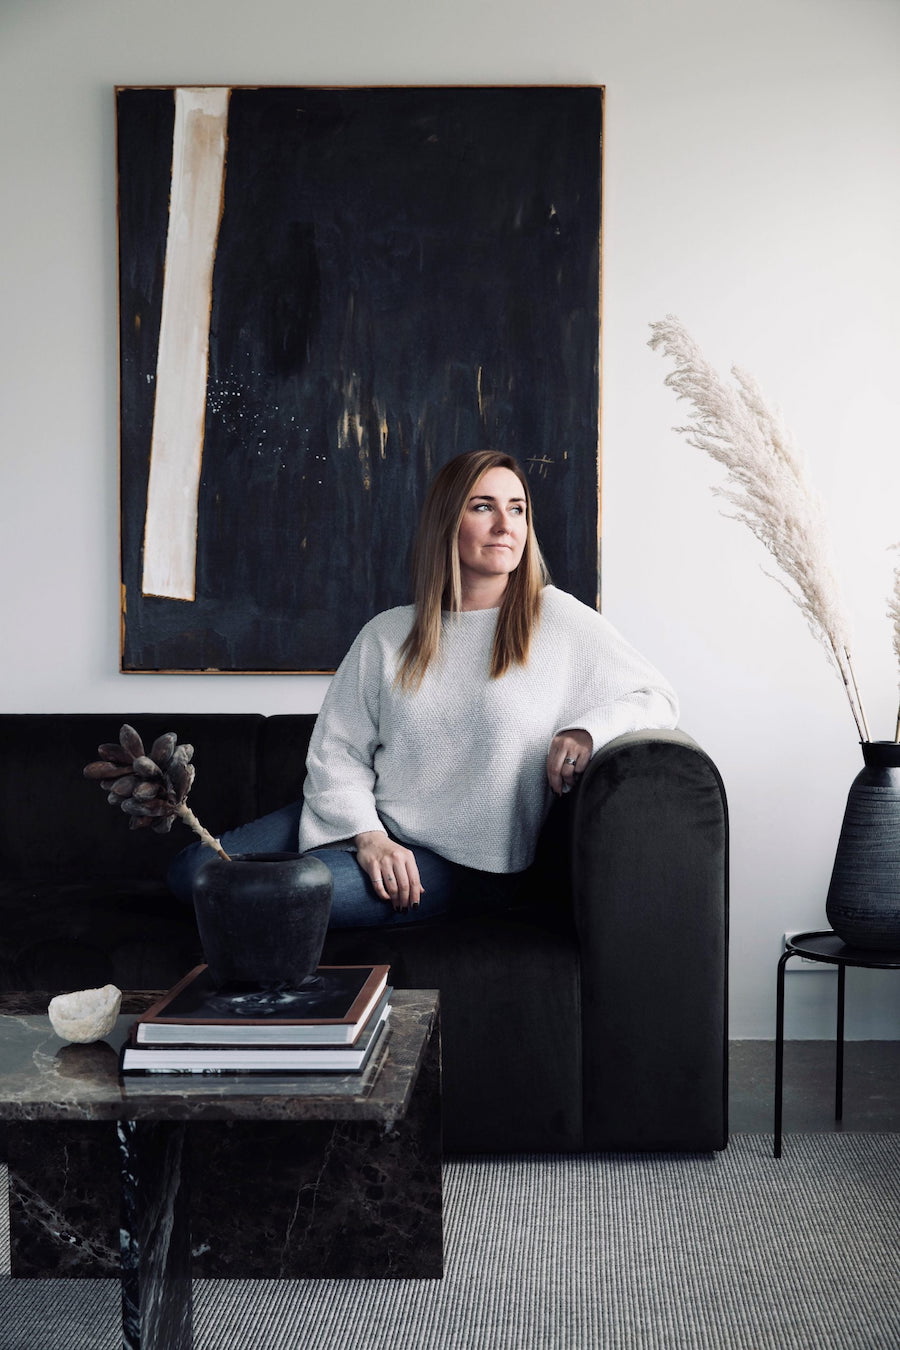 Discover The Work Of A Rising Interior Design Star From Iceland ...